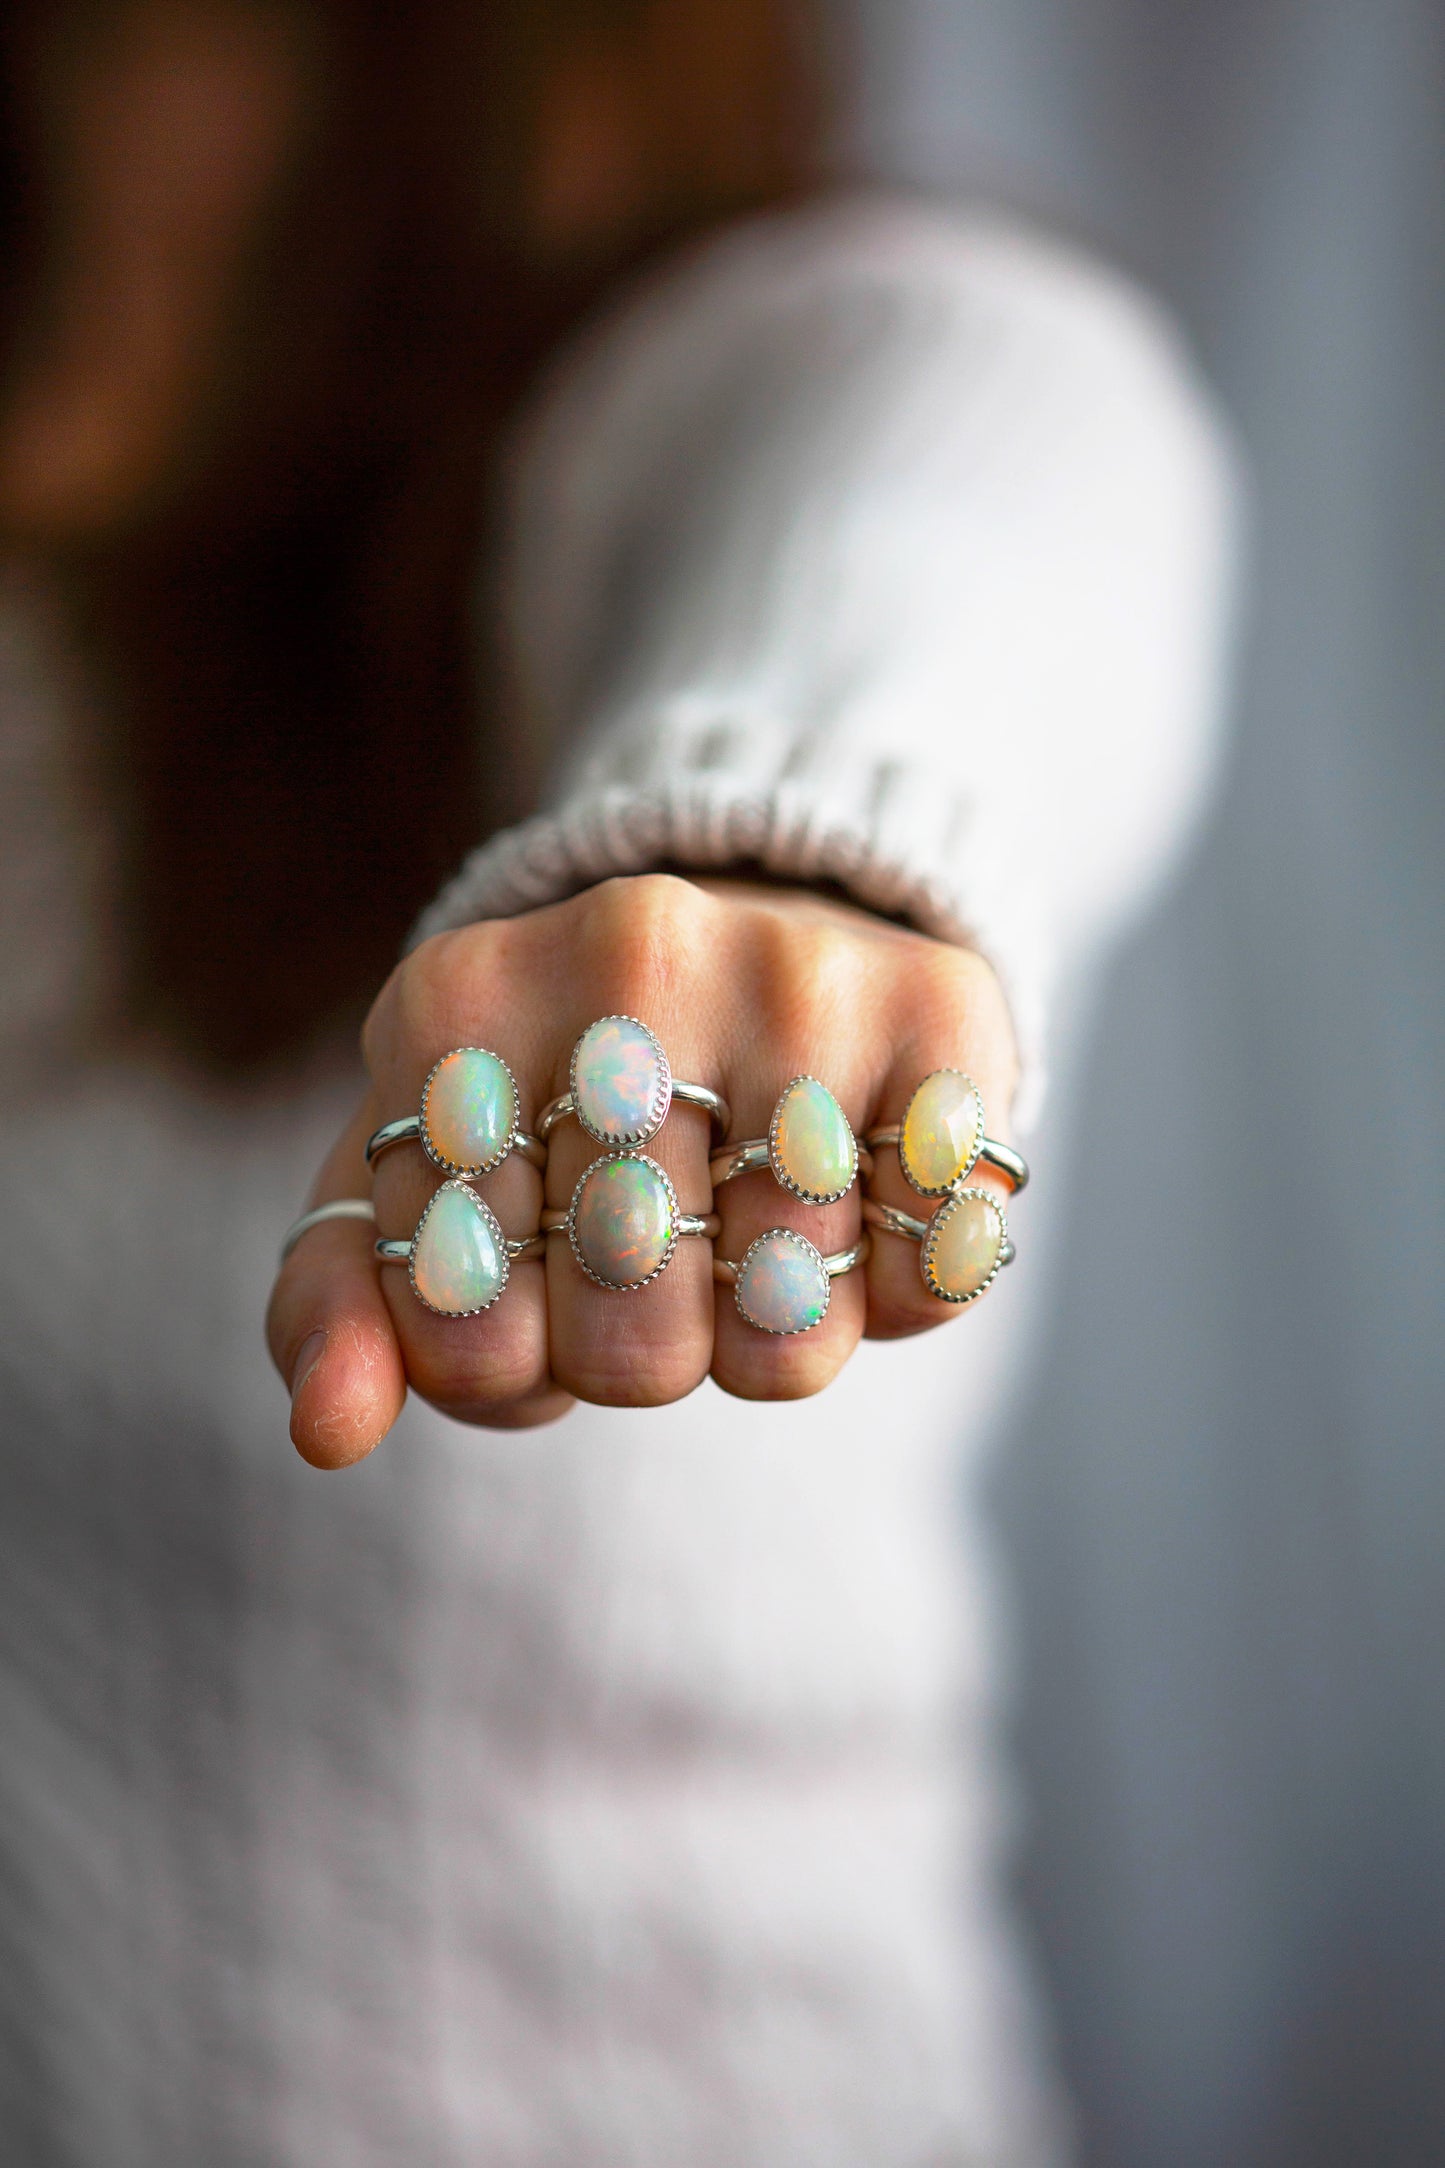 Size 6.75 | Opal Ring | #9